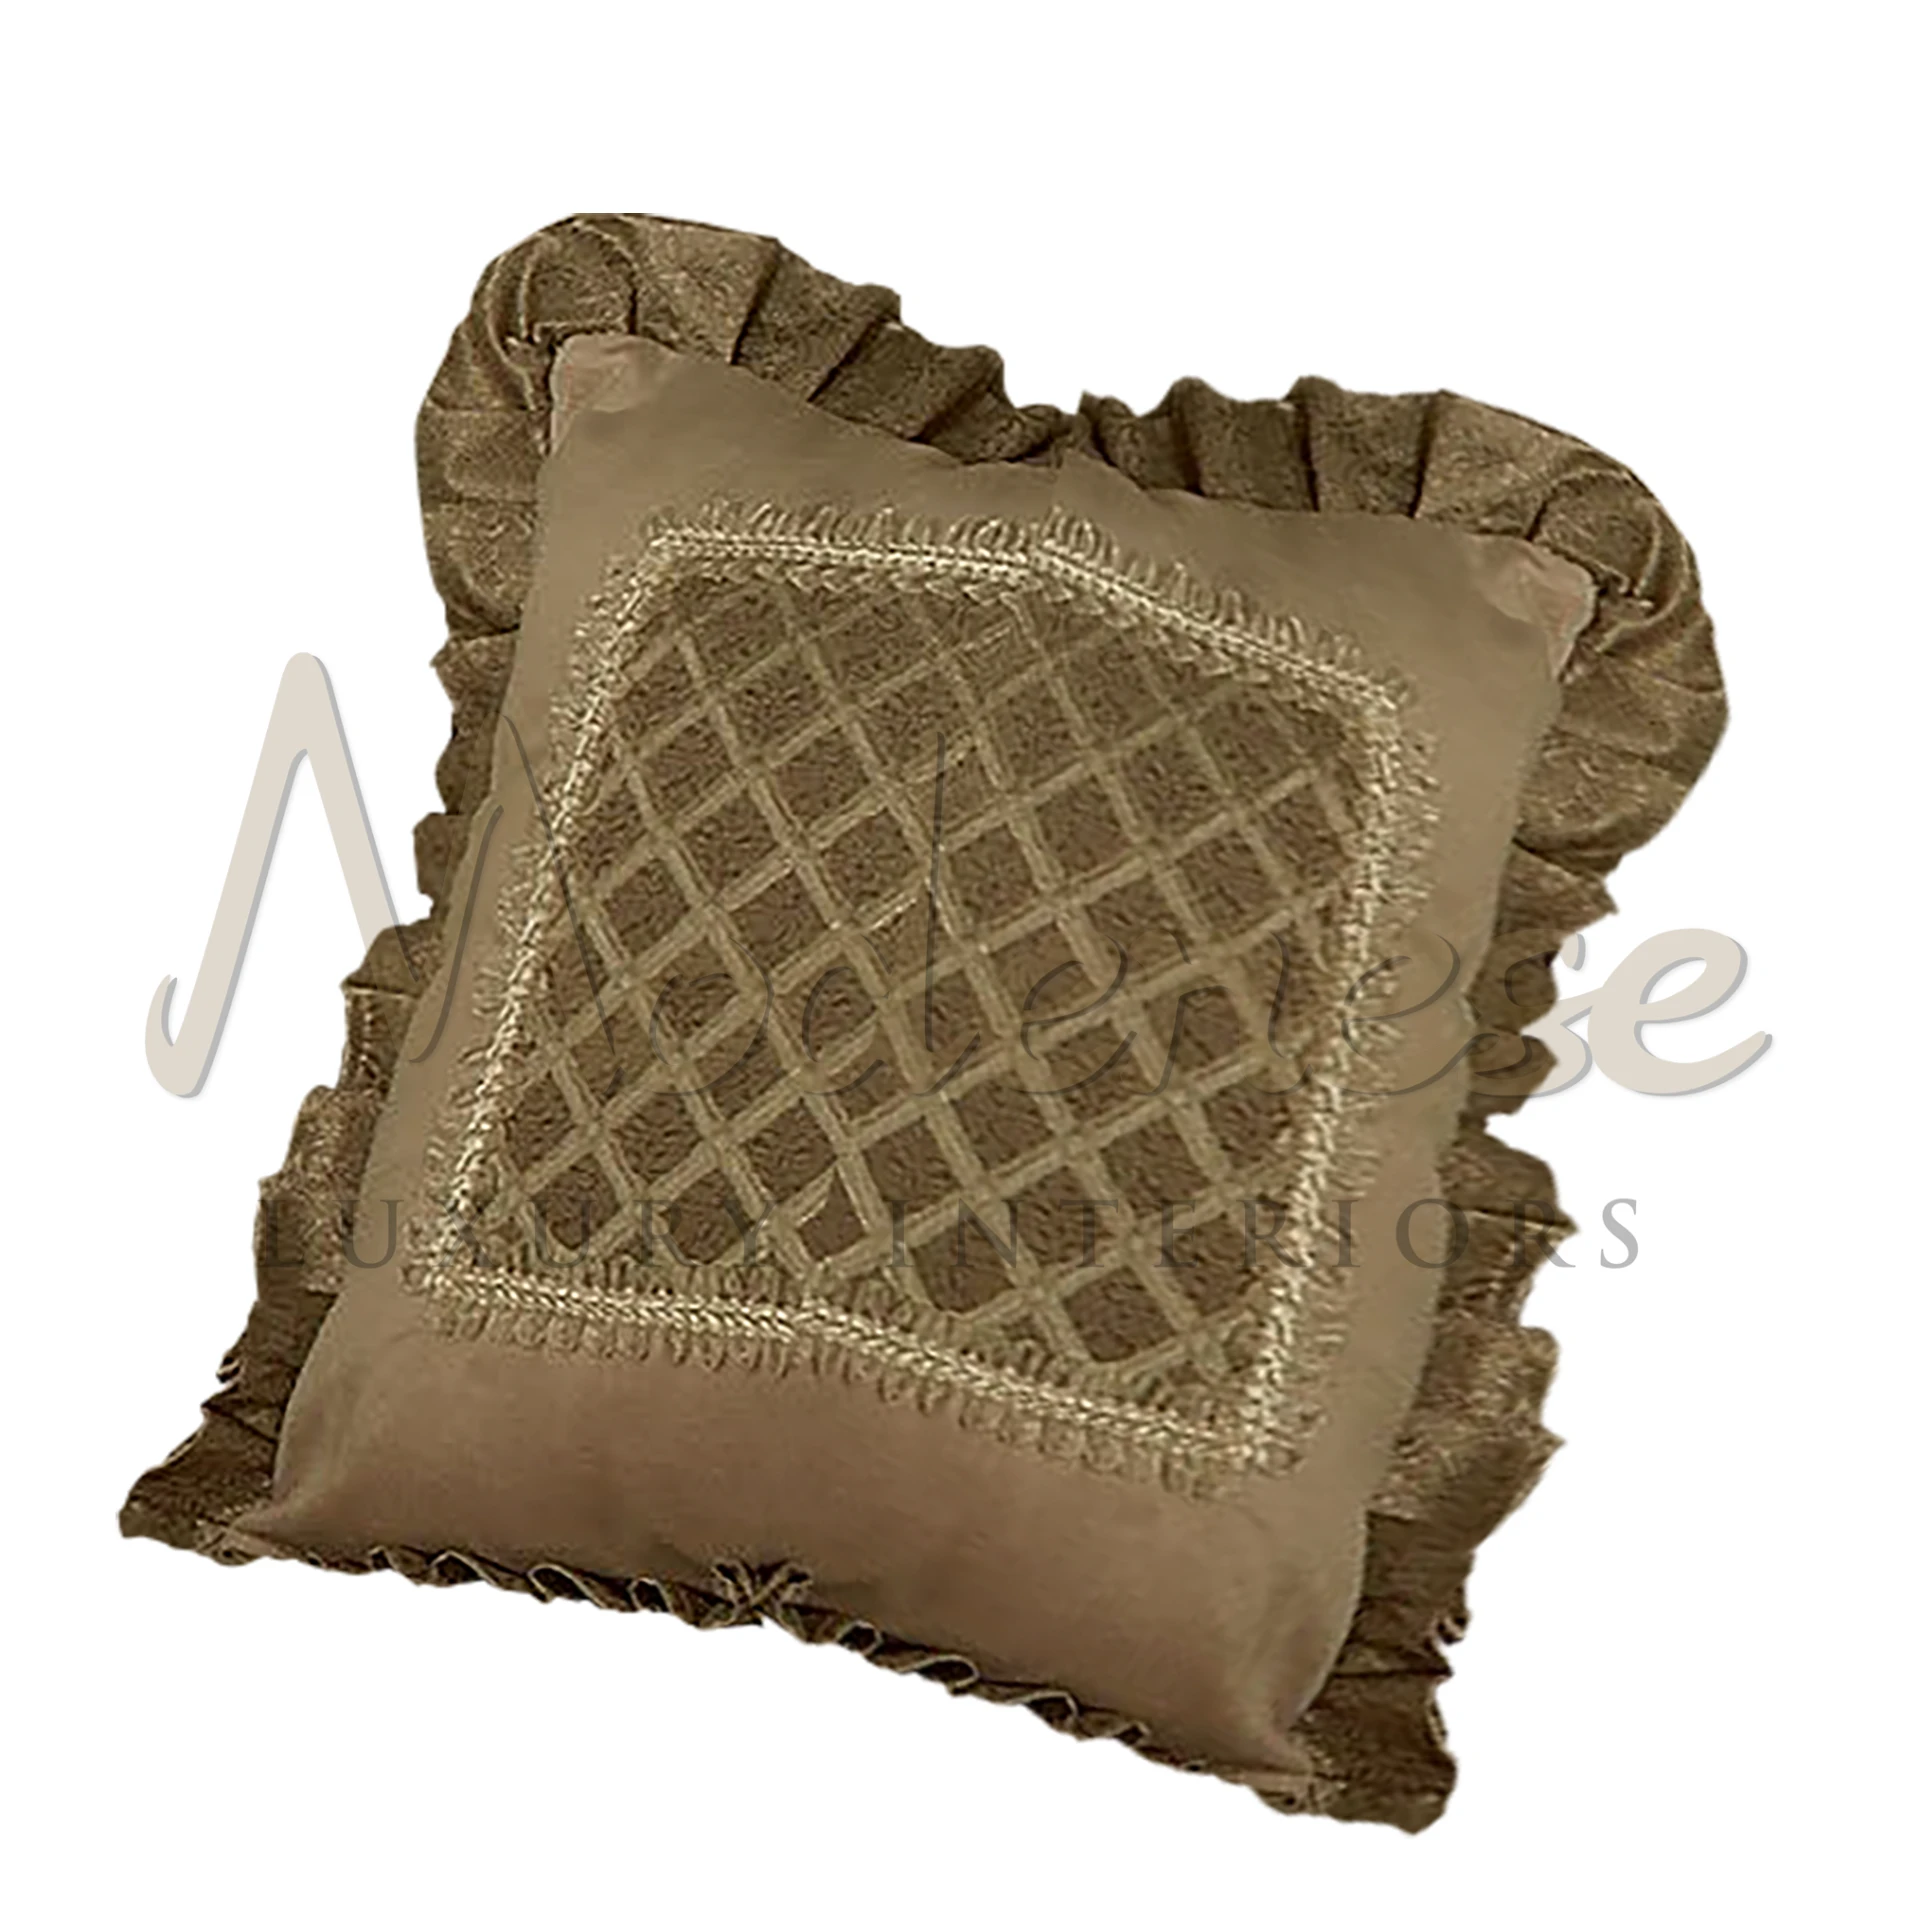 Classical Designer Pillow: Refined beauty and sophistication for a regal sofa, elegant armchair, or sumptuous bed.